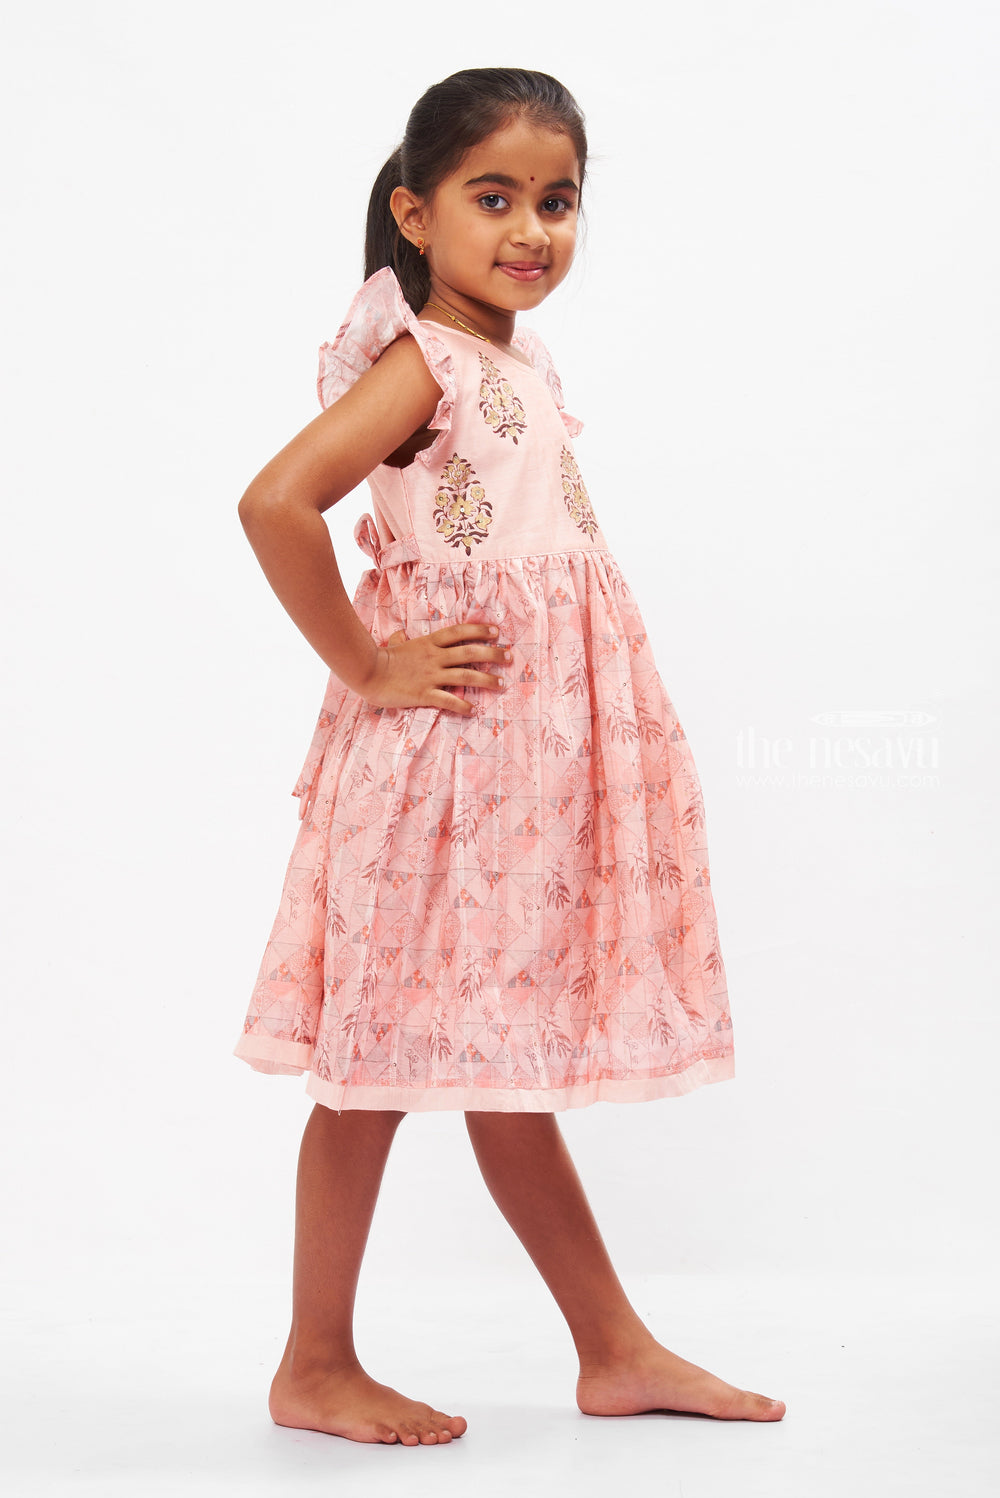 The Nesavu Girls Cotton Frock Coral Cotton Frock with Embellished Bodice and Ruffled Sleeves for Girls Nesavu Girls Chic Cotton Dress Designs | Coral Frock with Ruffle Detail | The Nesavu